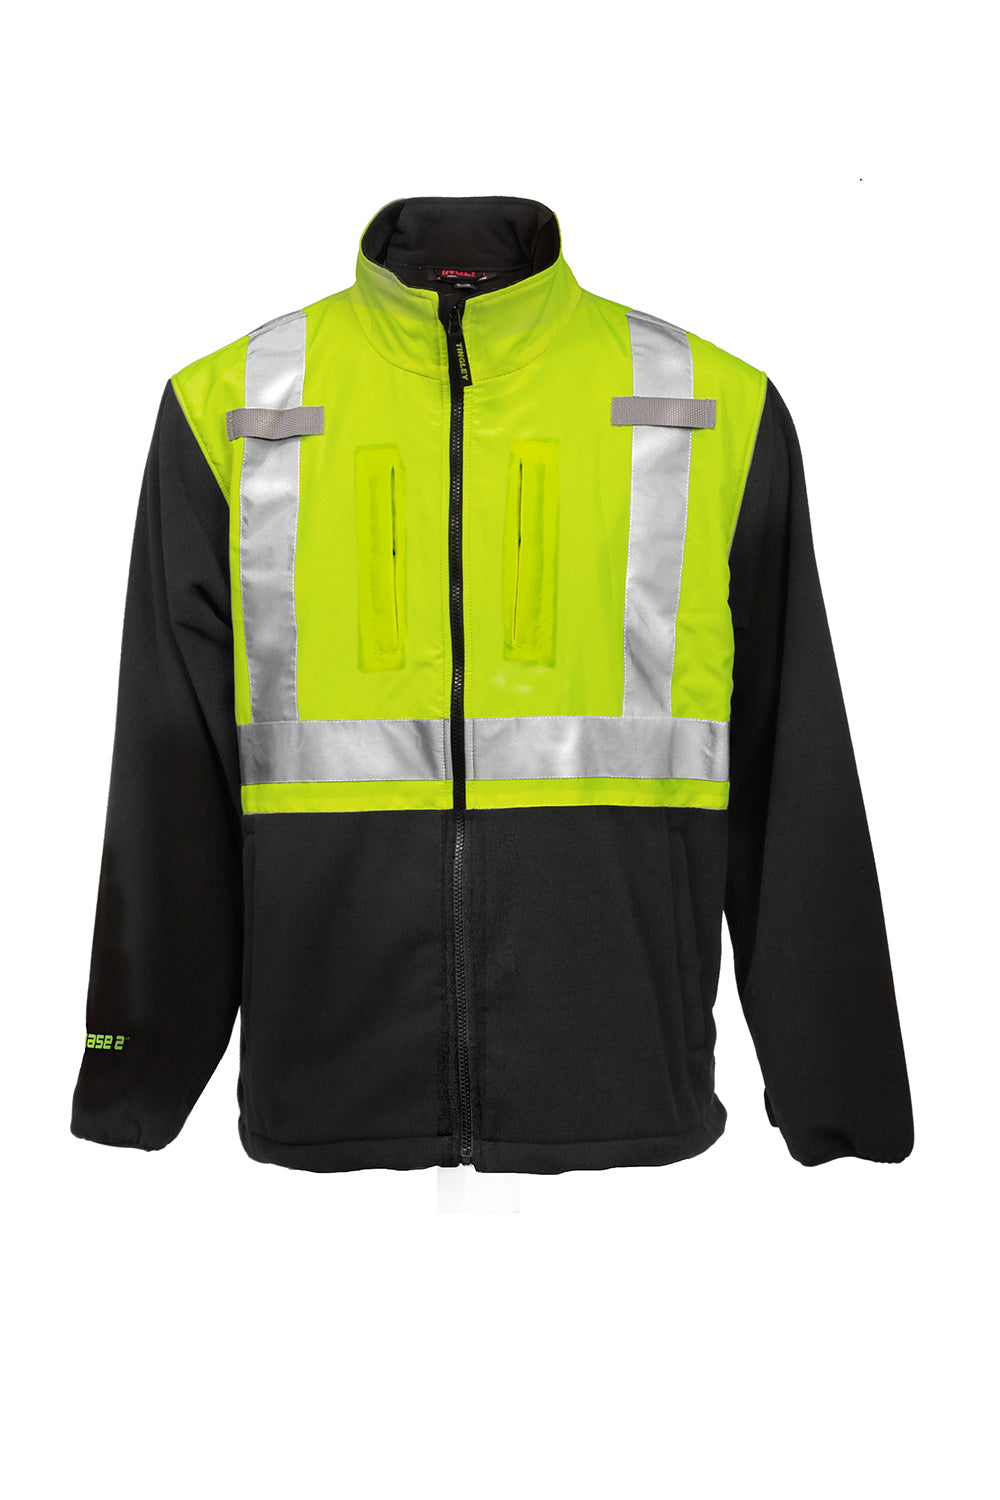 PHASE 2™ Jacket – Fluorescent Yellow-Green-Black - Silver Reflective Tape-eSafety Supplies, Inc